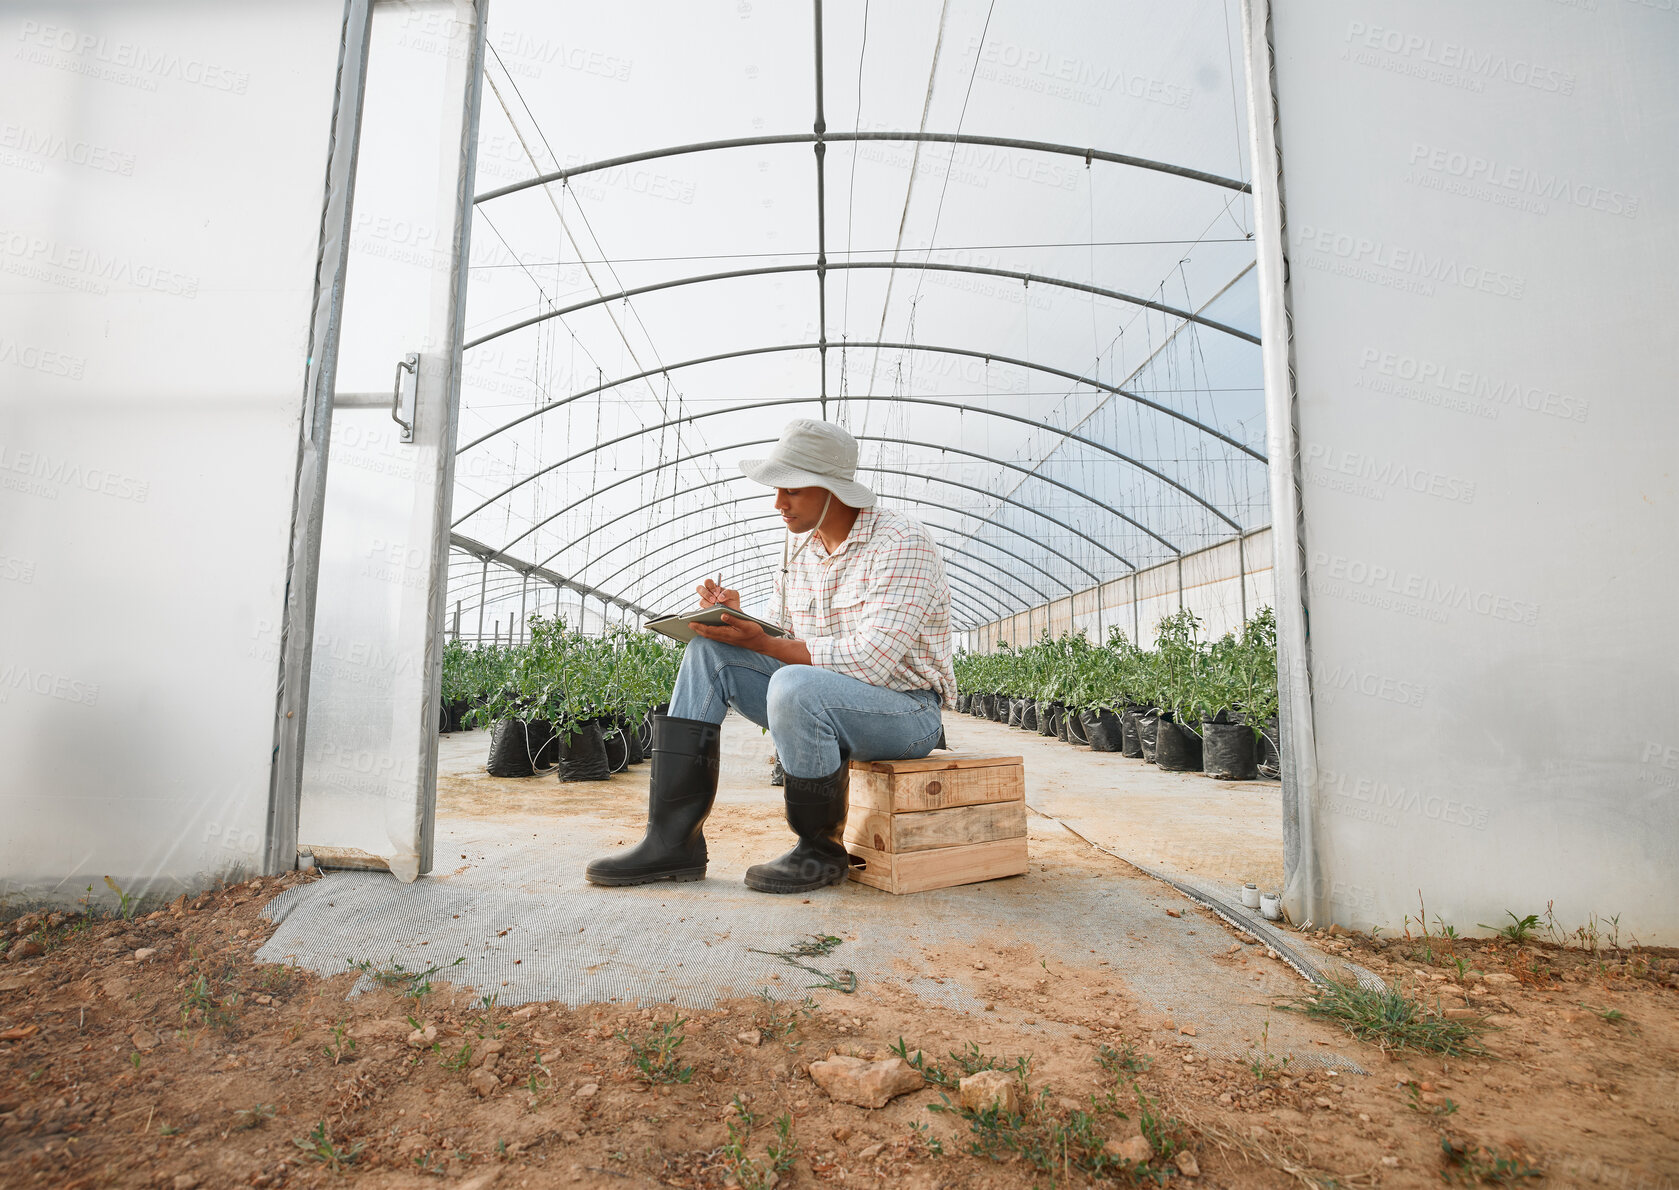 Buy stock photo Shot of a young man writing notes while working in a greenhouse on a farm